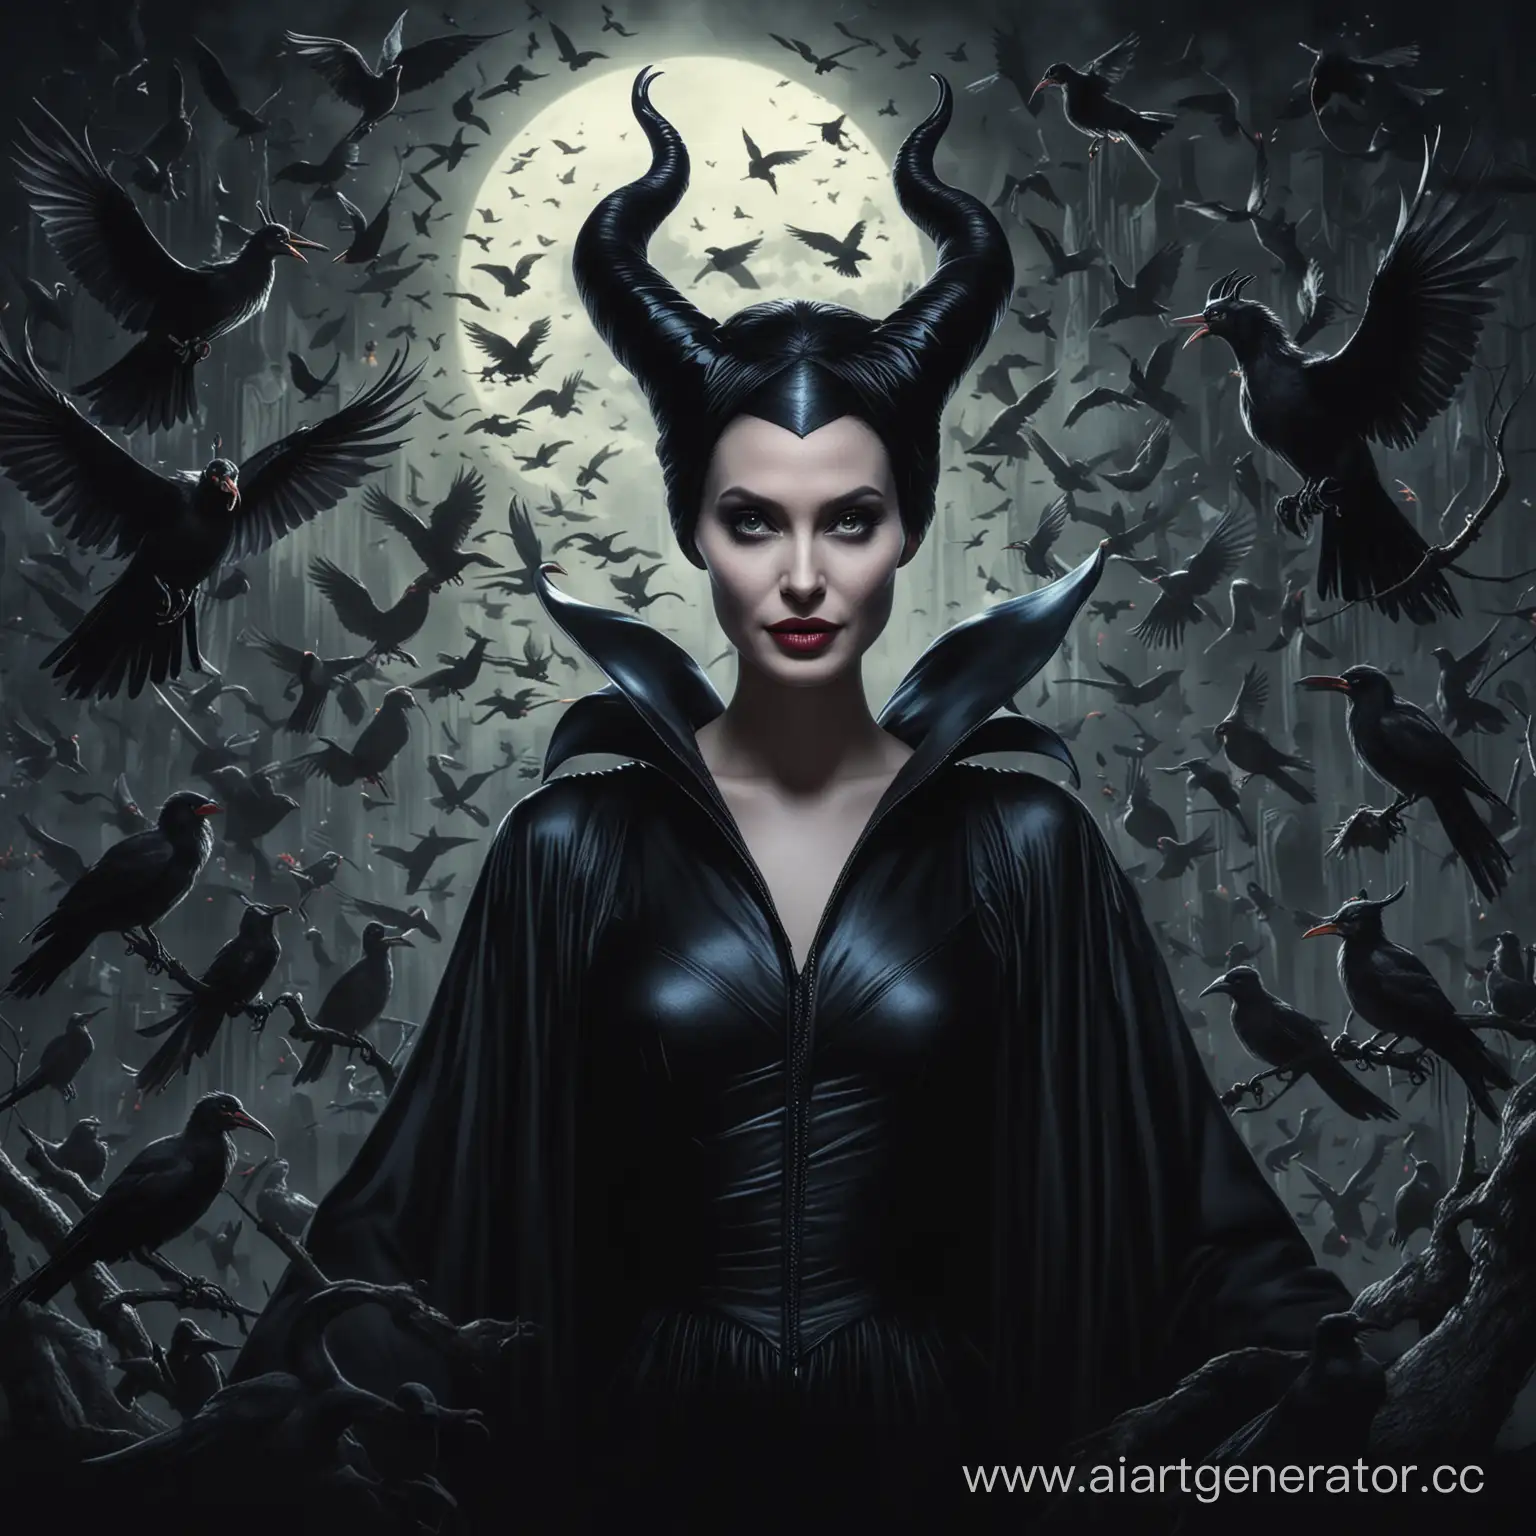 Maleficent-Sorceress-with-Raven-Familiars-in-Shadowy-Atmosphere